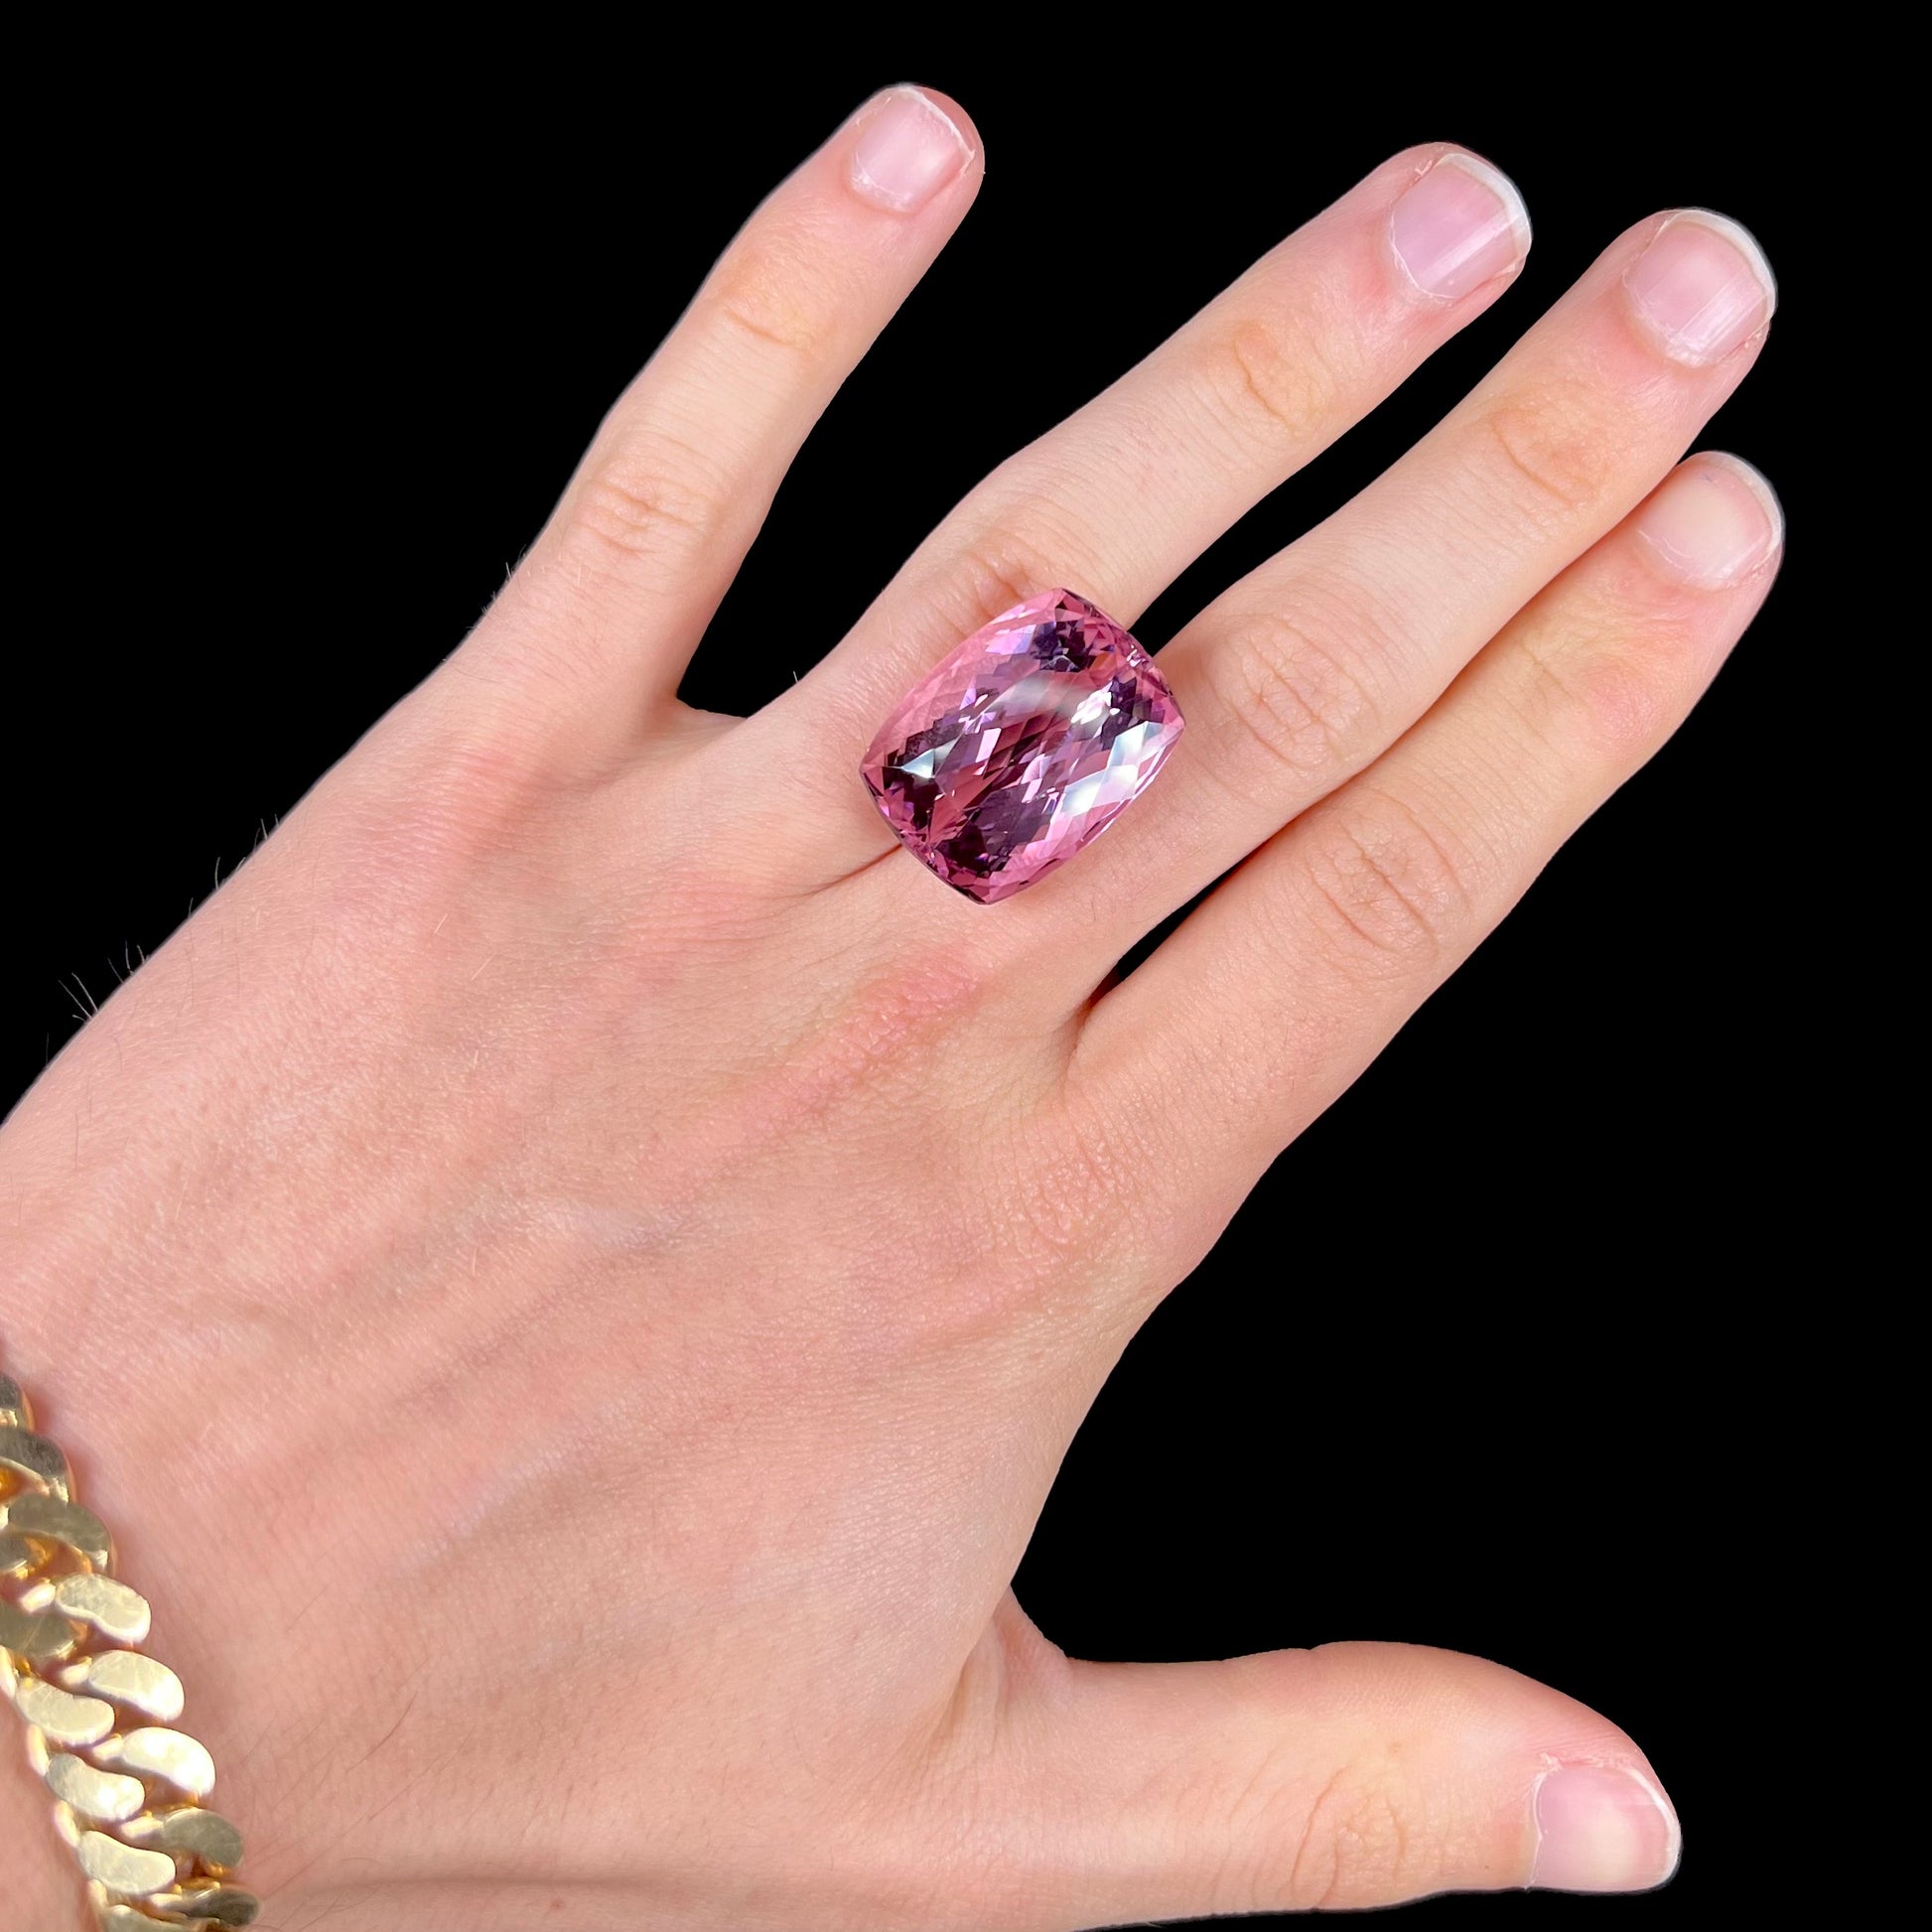 A modified cushion cut Afghanistan kunzite gemstone.  The stone is a purplish pink color and weighs 49.30 carats.